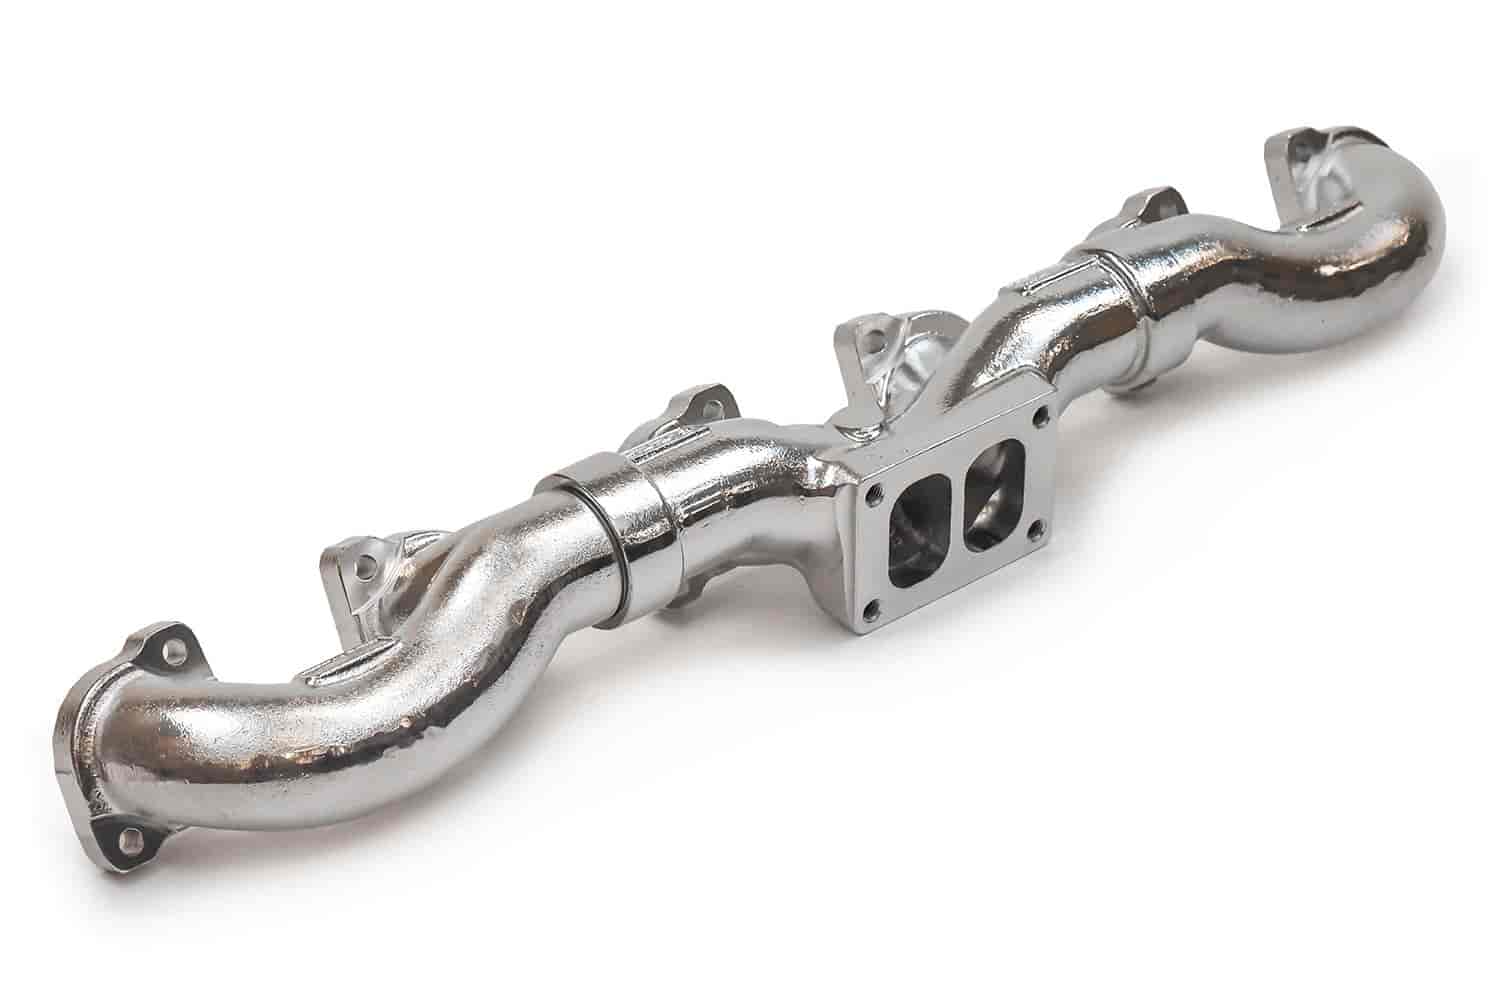 Series 60 Exhaust Manifold for 1994-2003 Detroit Series 60 12.7L and 14L Engines - Ceramic Coated